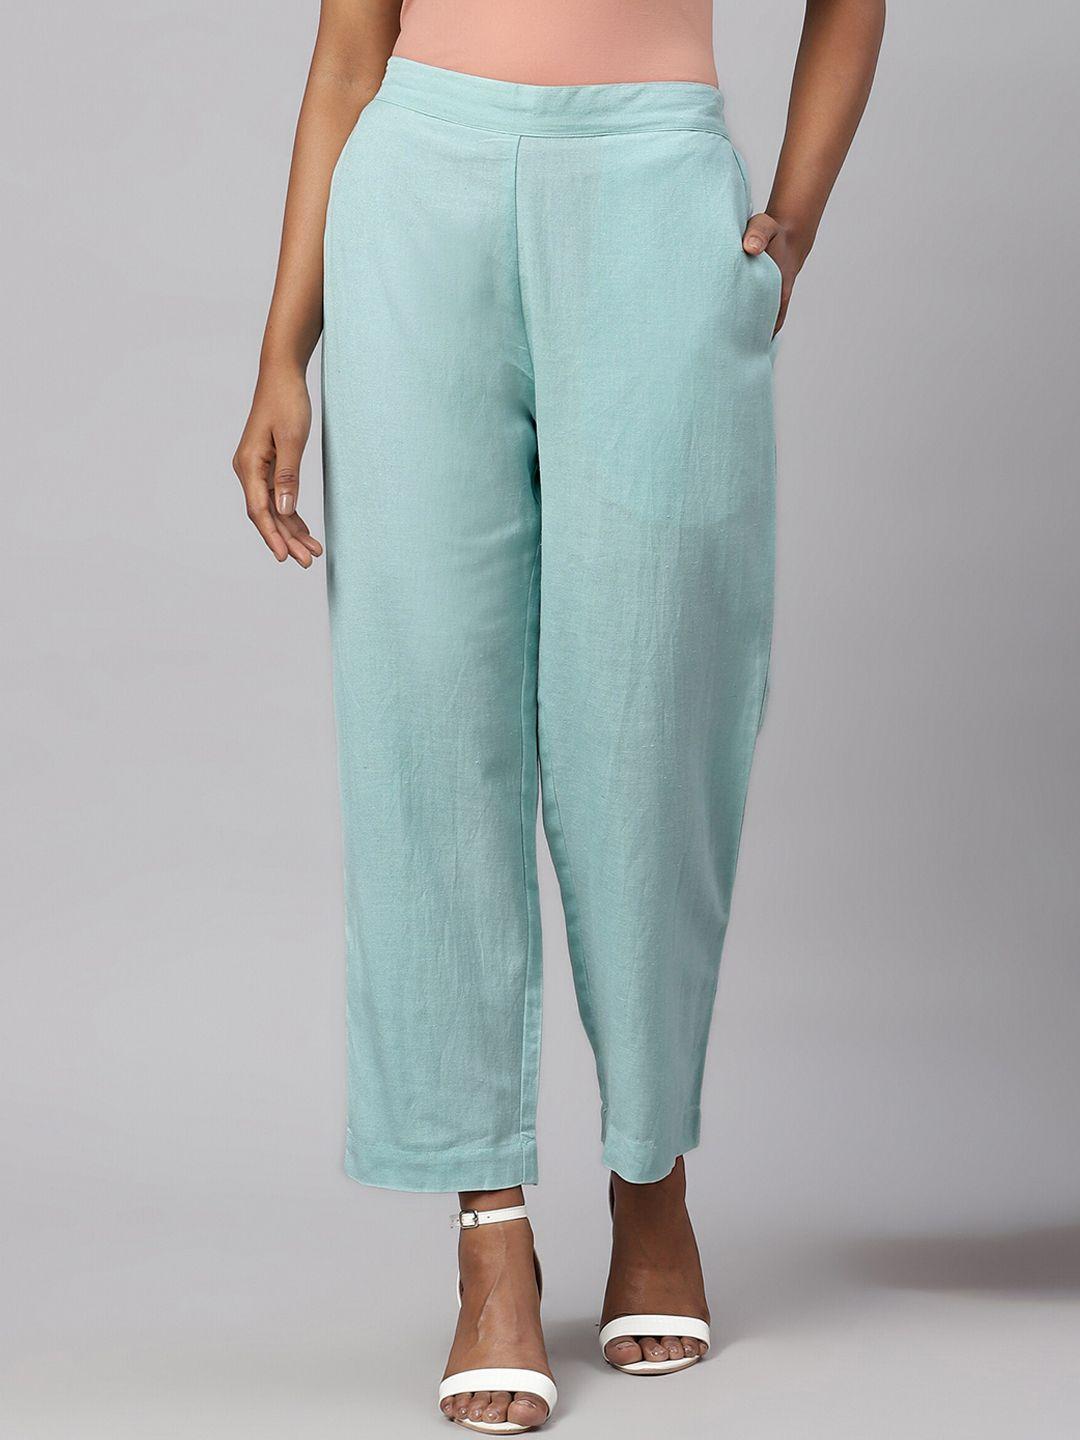 linen club woman turquoise blue solid straight lounge pants